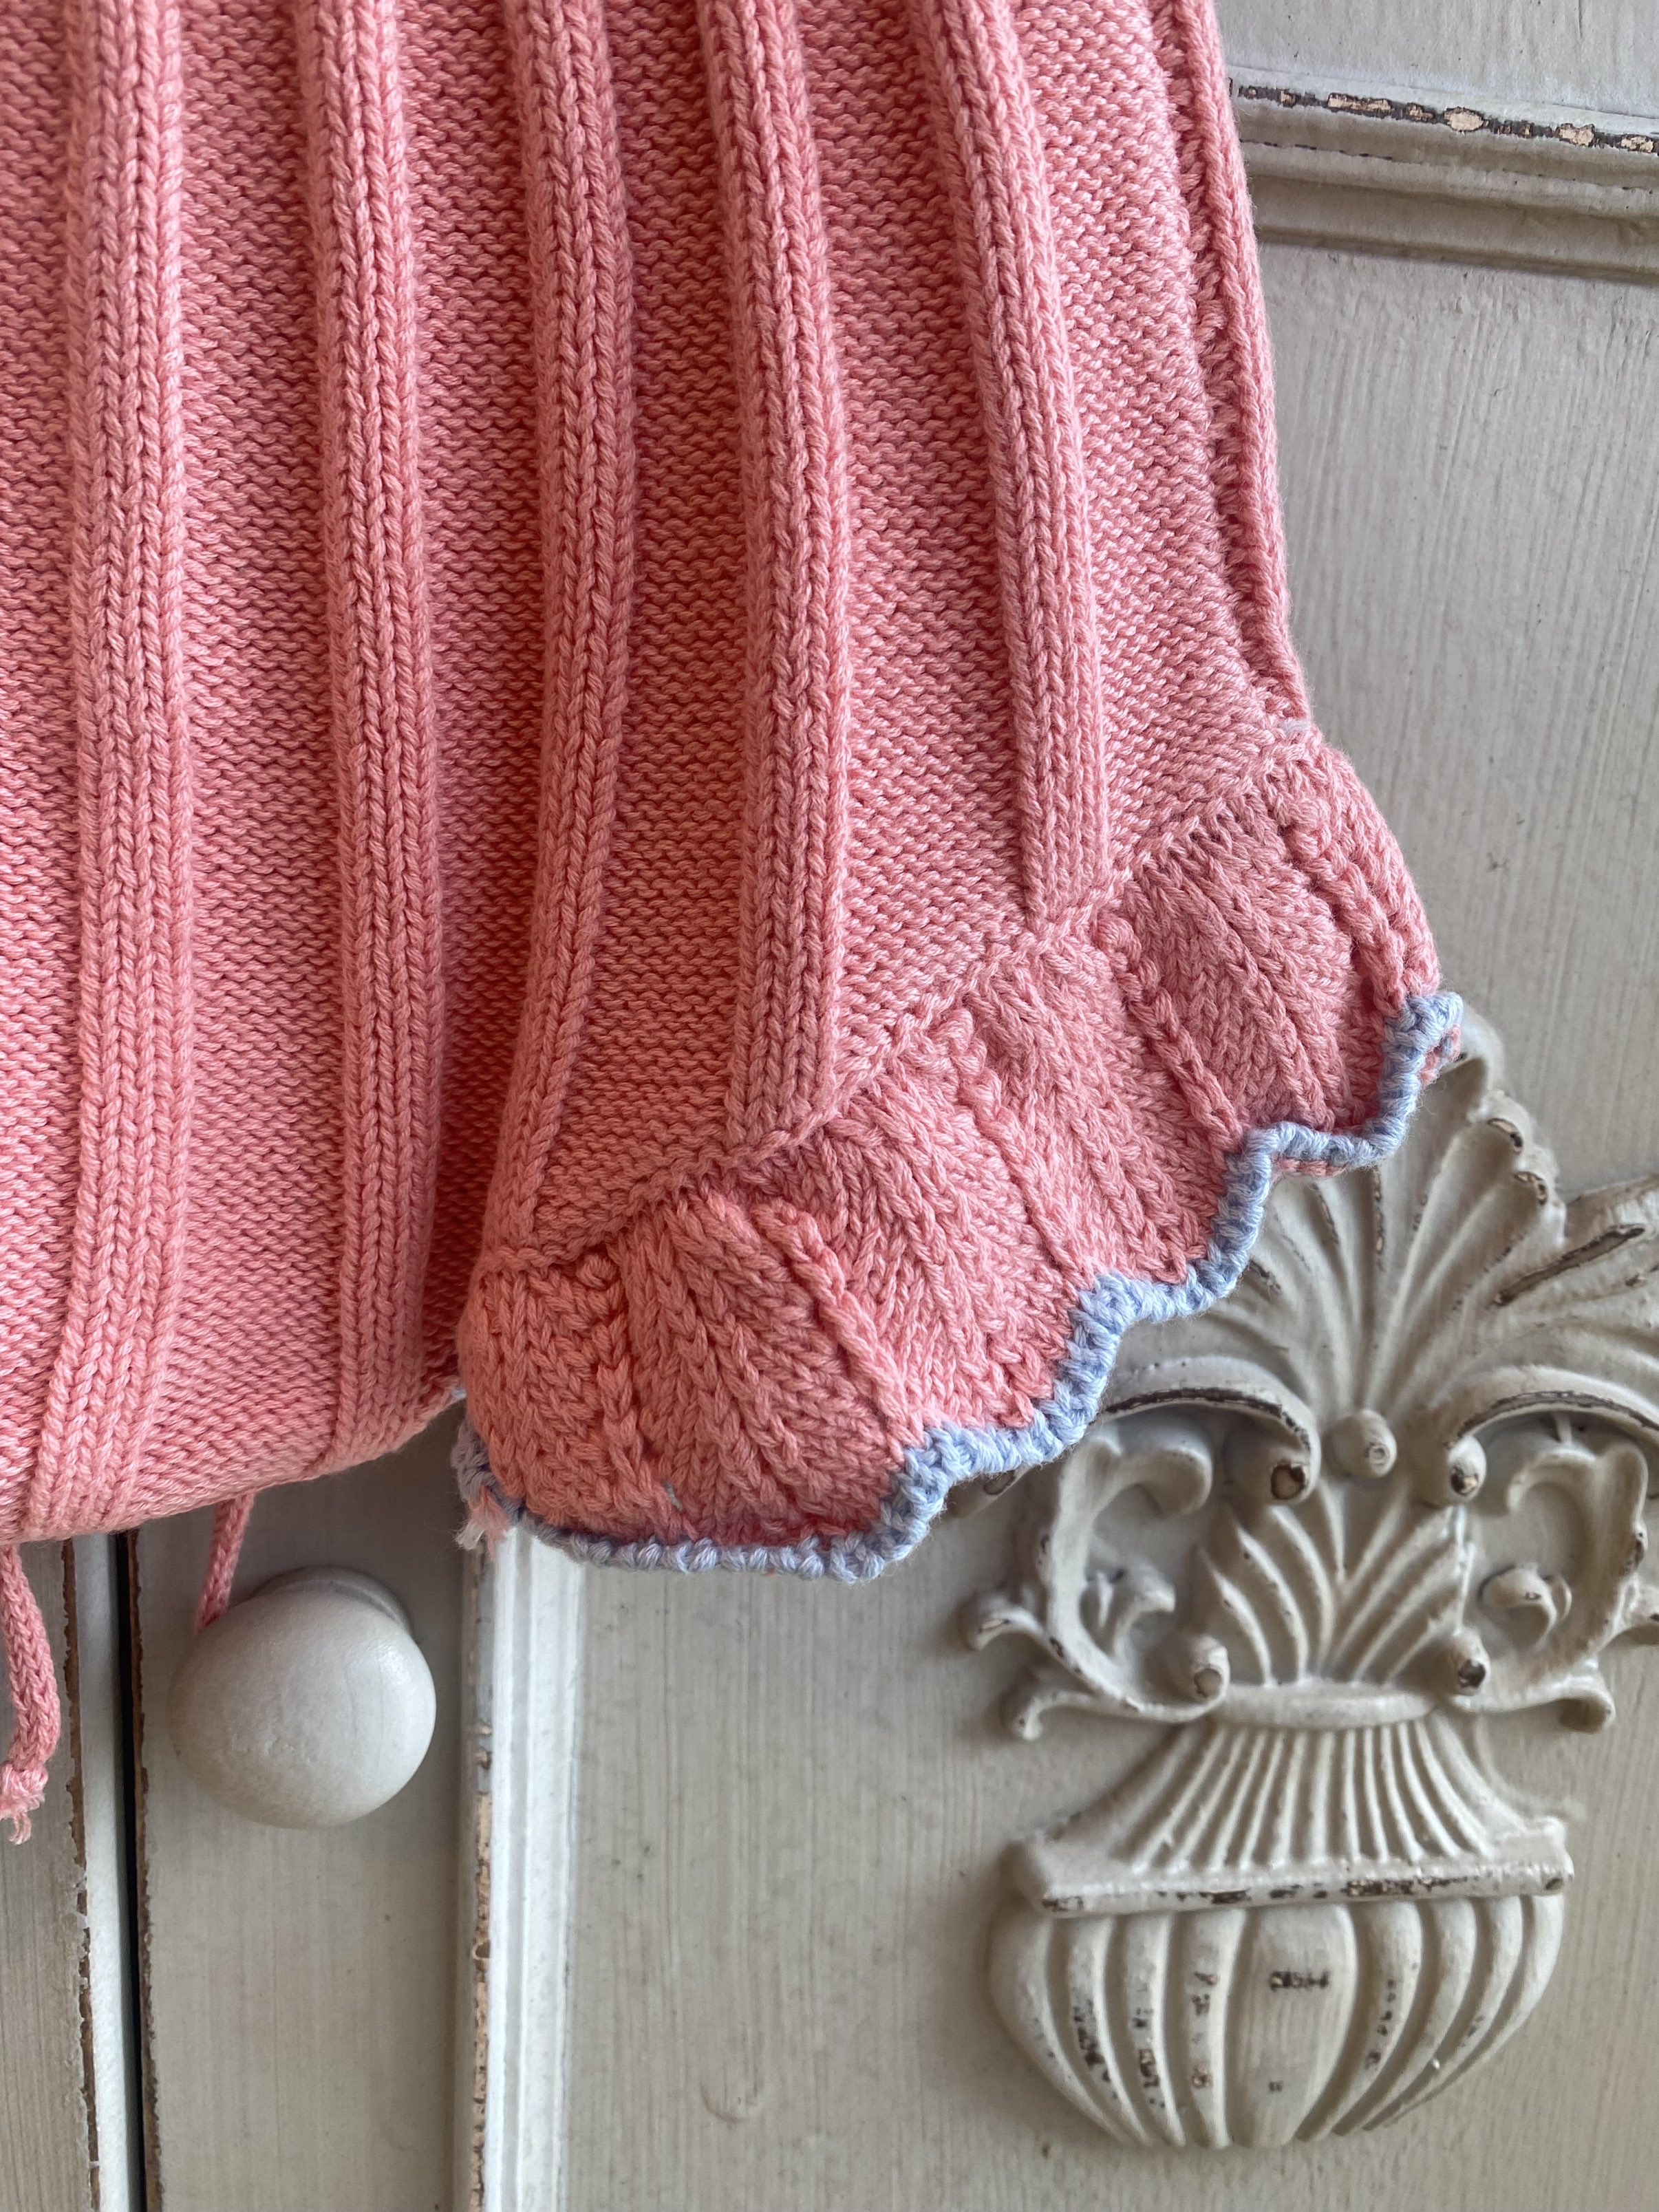 close up of a knitted baby and toddler bloomer or skirt. Shows pink knitted bloomer with a dainty, frilly edge with blue edge.